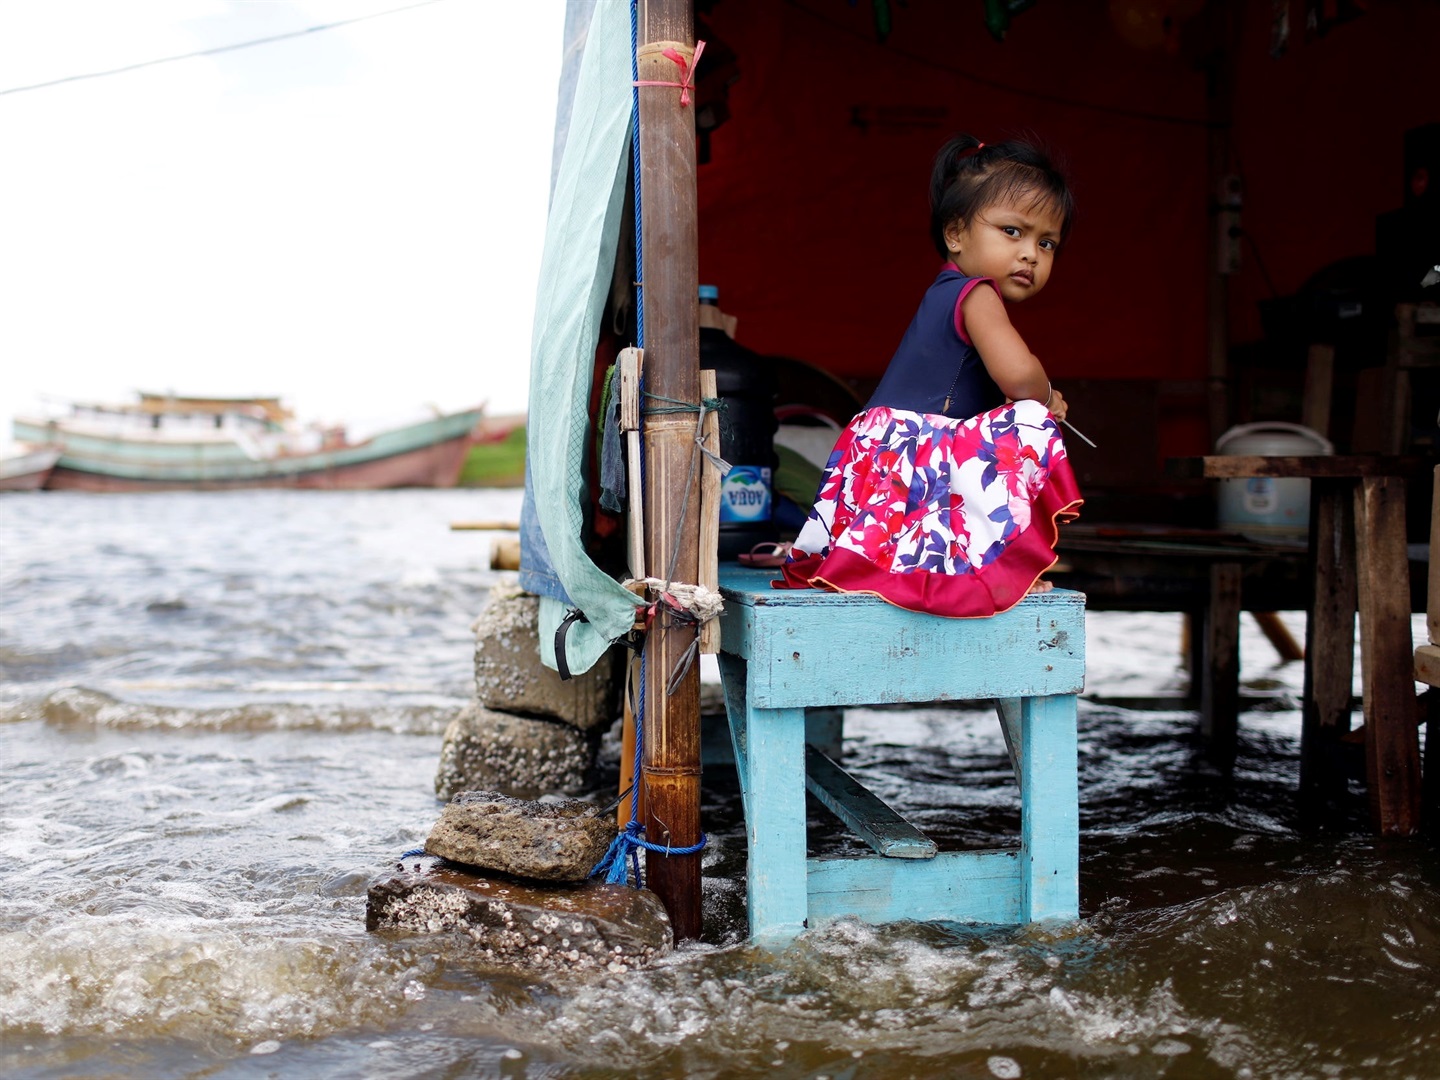 A 2-year-old sits on a bench at Kali Adem port, amid high tides due to rising seas and sinking land, north of Jakarta, Indonesia, on November 20, 2020. Willy Kurniawan/Reuters